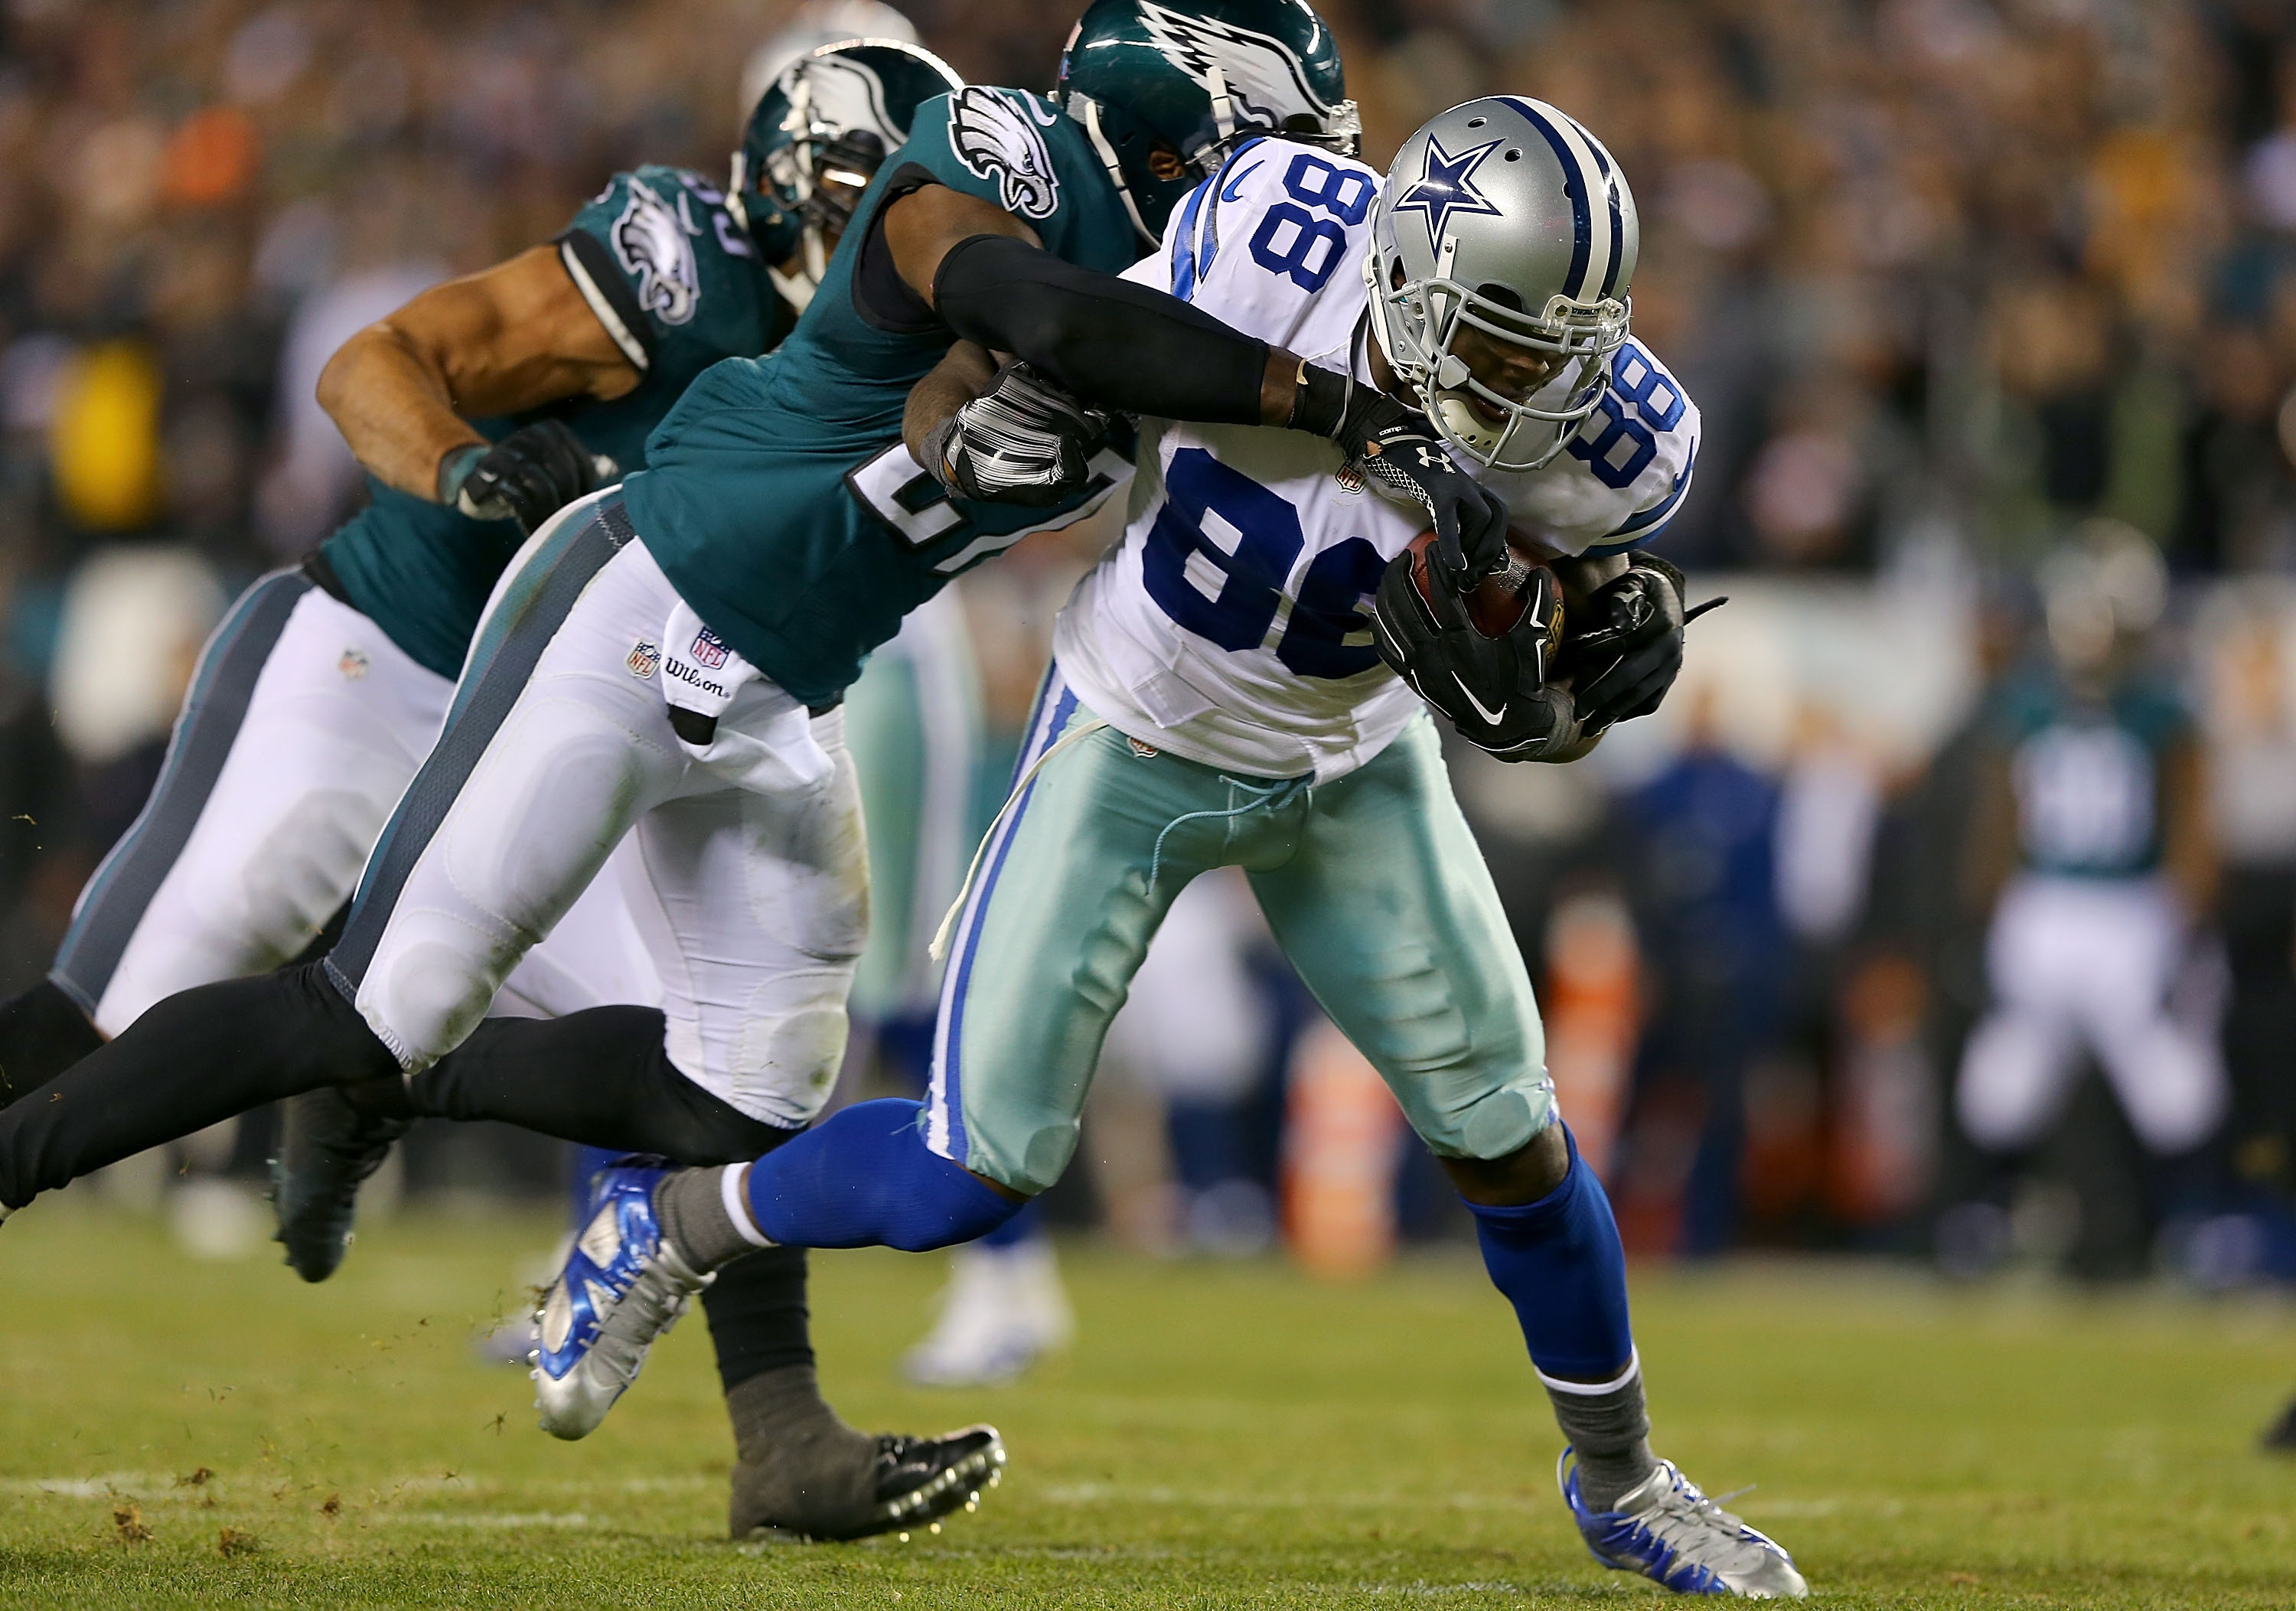 Eagles vs. Cowboys Live Stream How to Watch Game Online